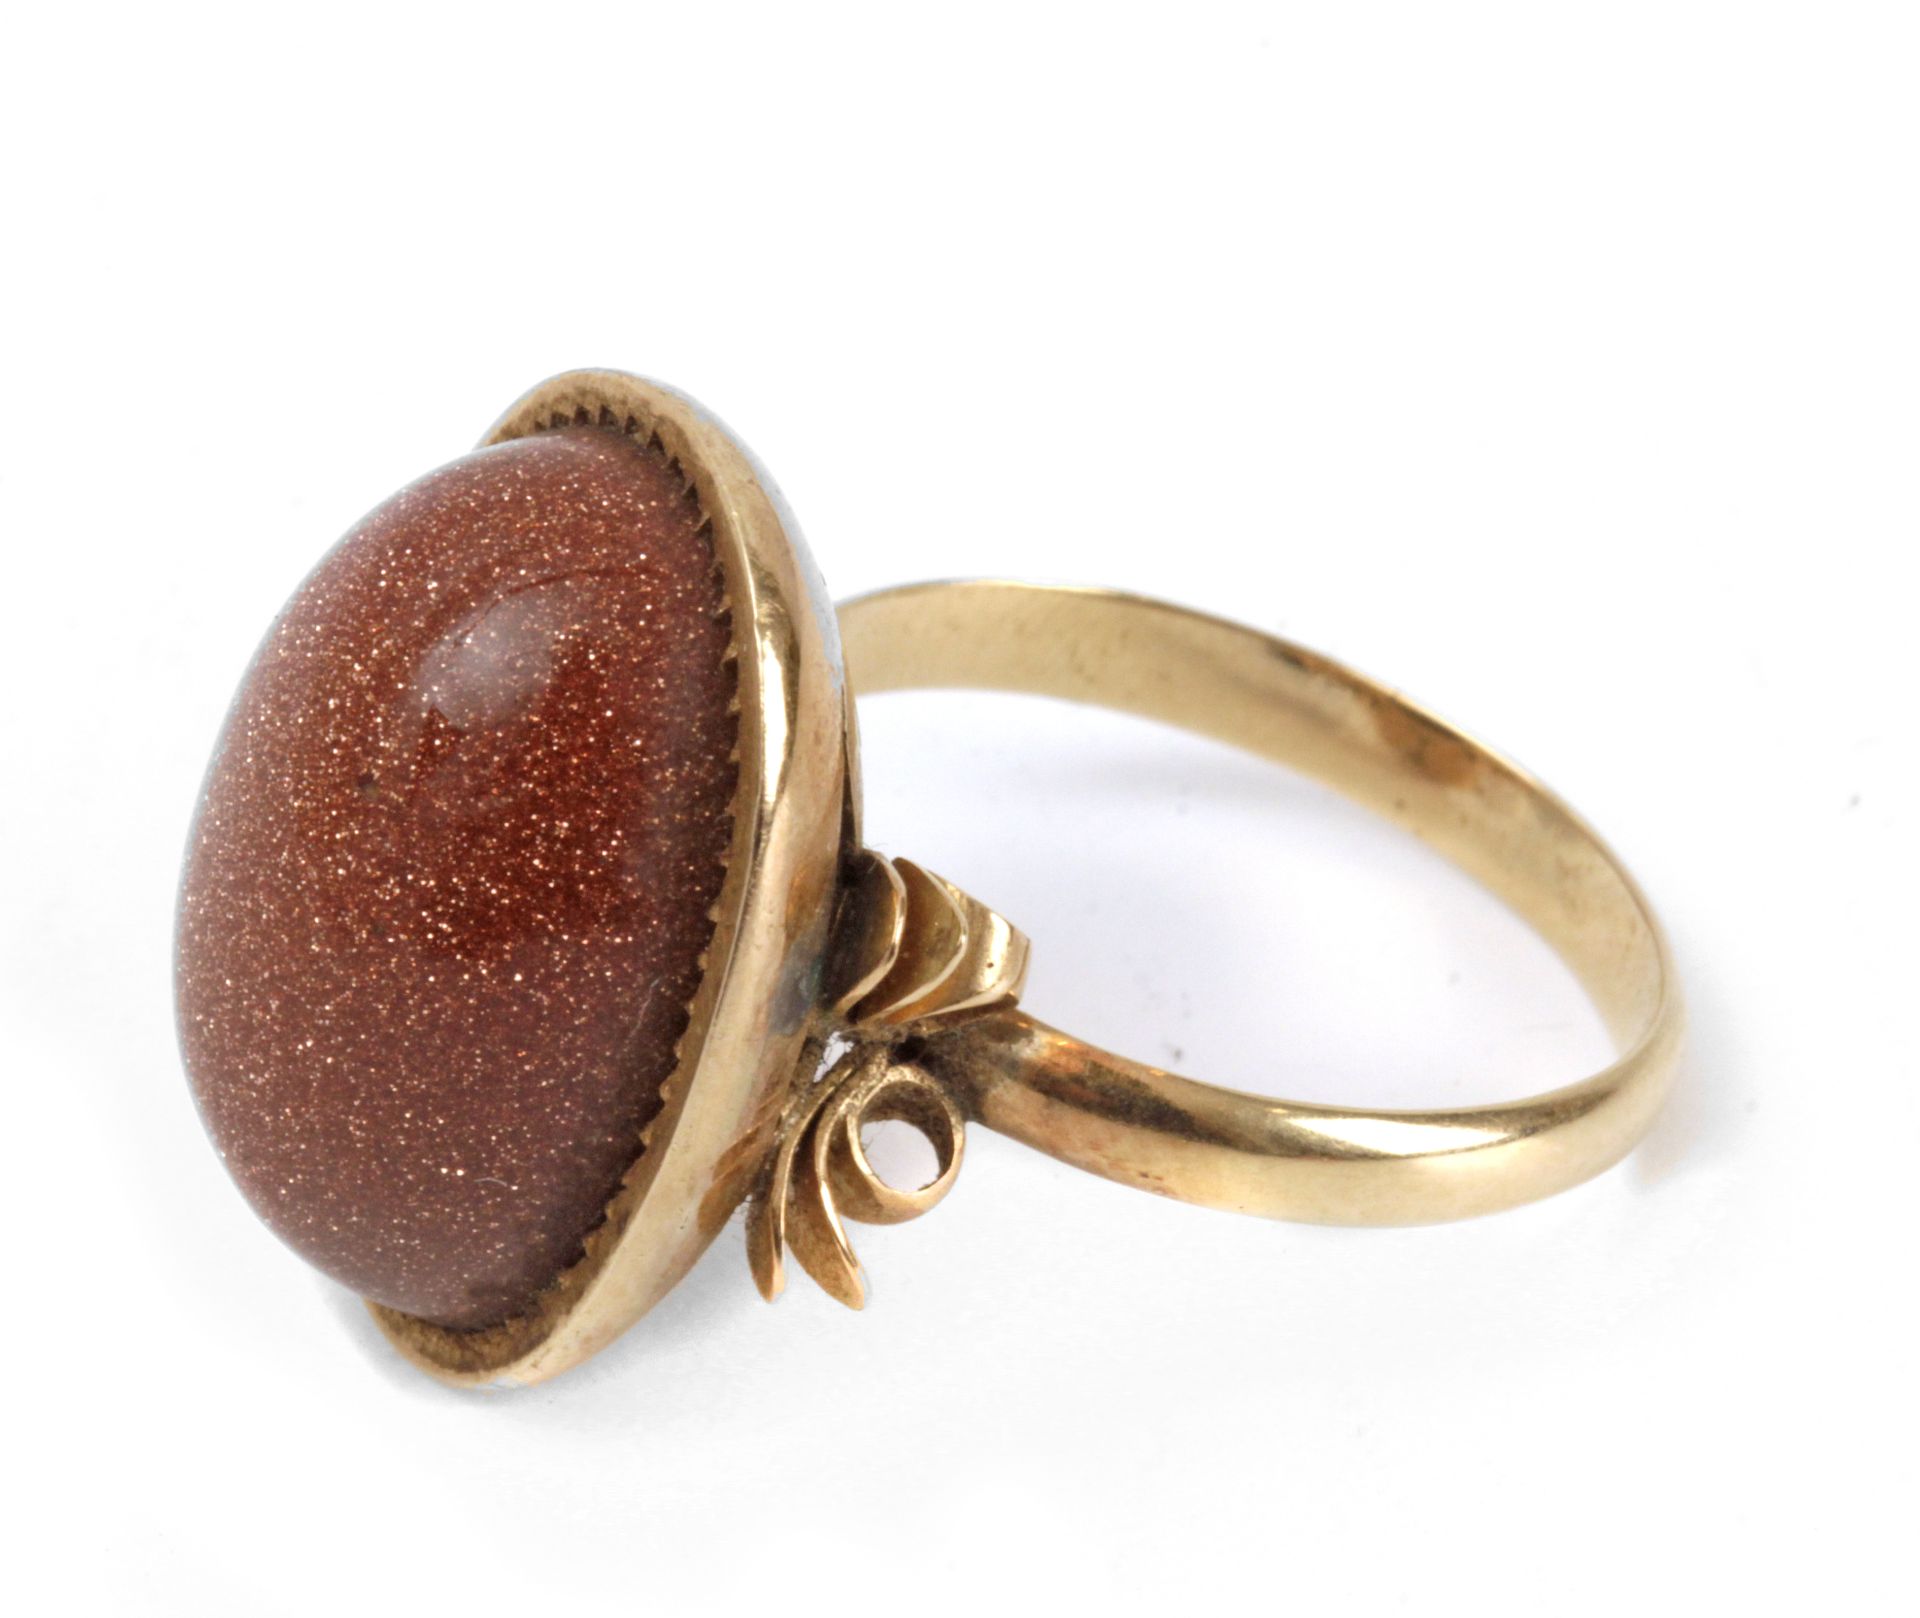 A mid 20th century aventurine glass ring with an 18k. yellow gold setting